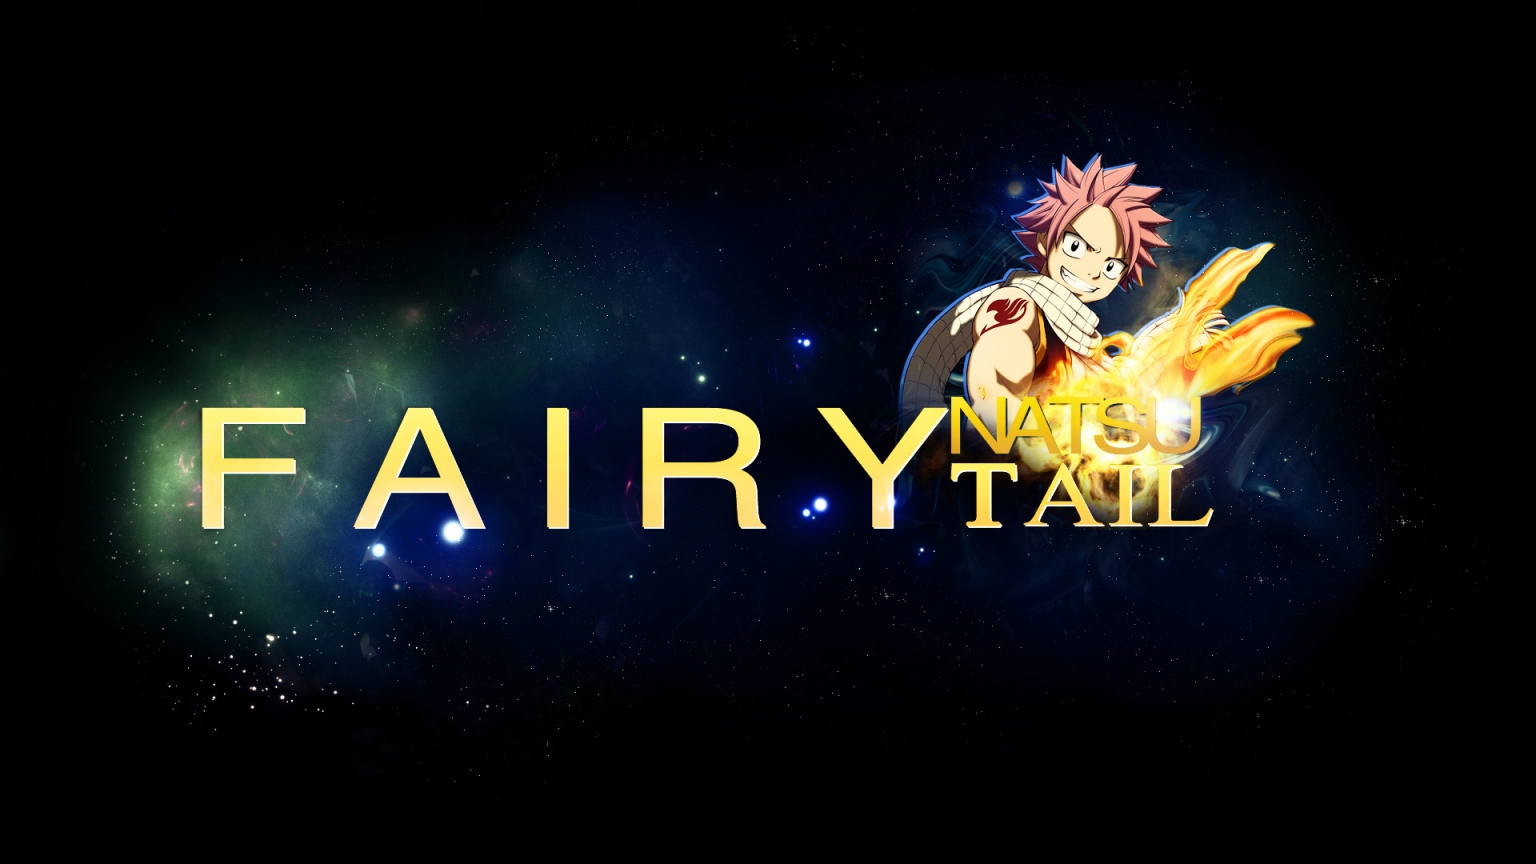 Fairy Tail Natsu for 1536 x 864 HDTV resolution